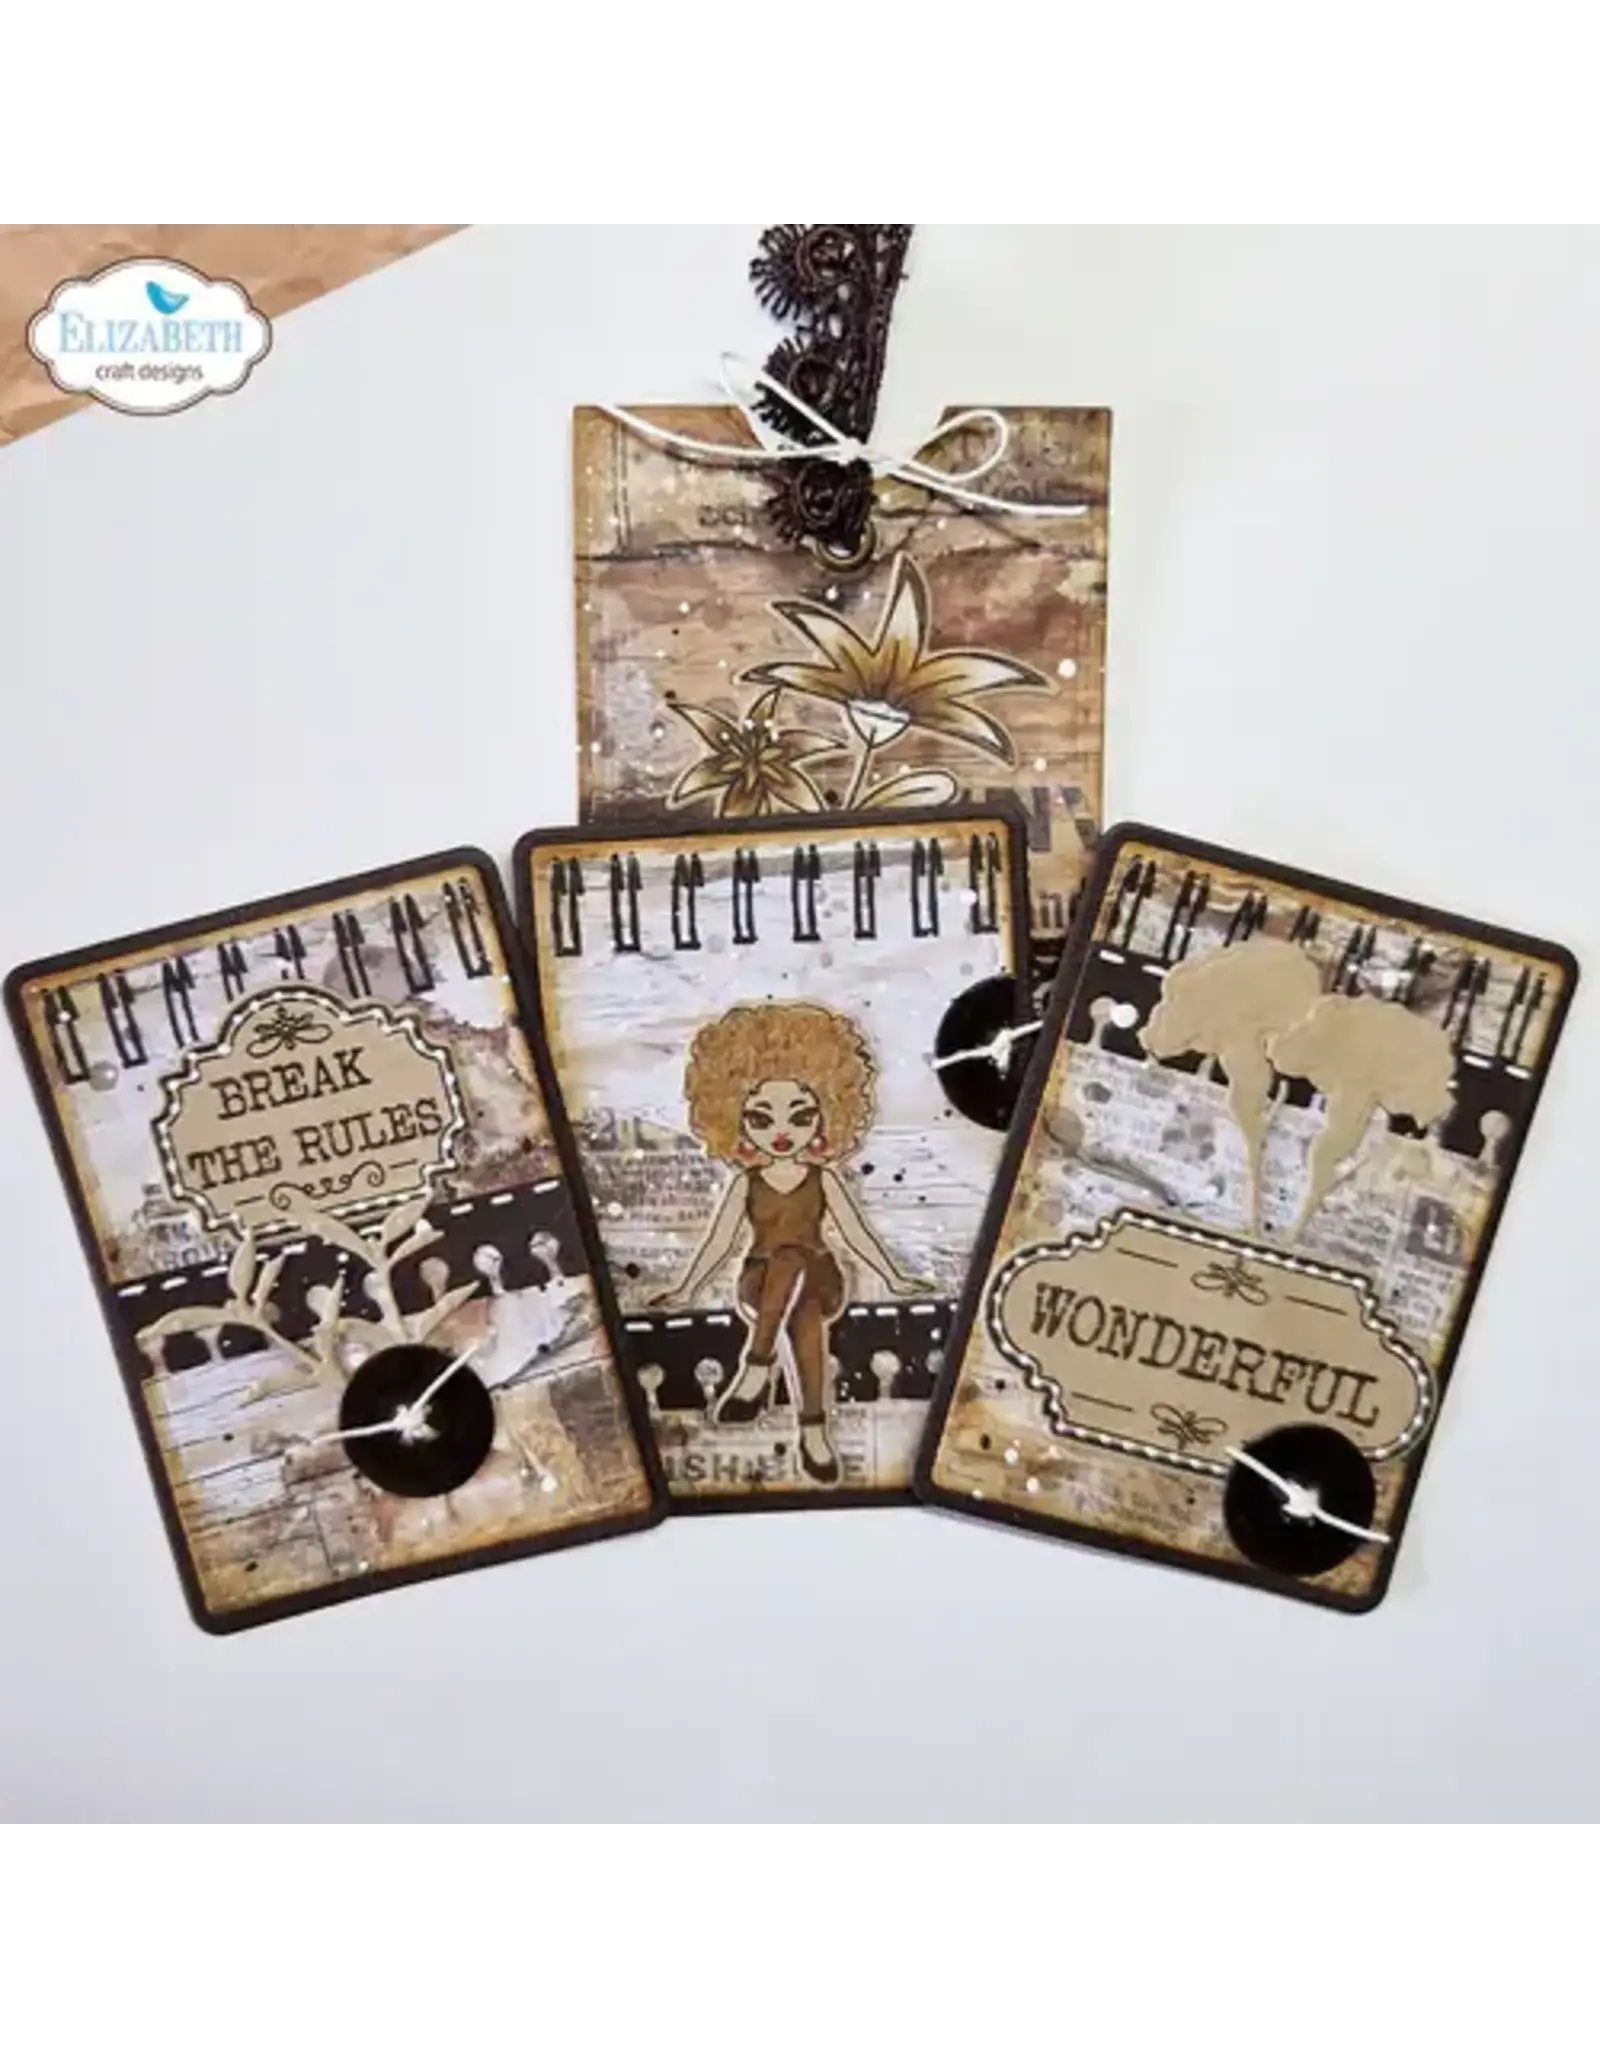 ELIZABETH CRAFT DESIGNS ELIZABETH CRAFT DESIGNS ART JOURNAL SPECIALS BY DEVID ATC SPECIAL KIT